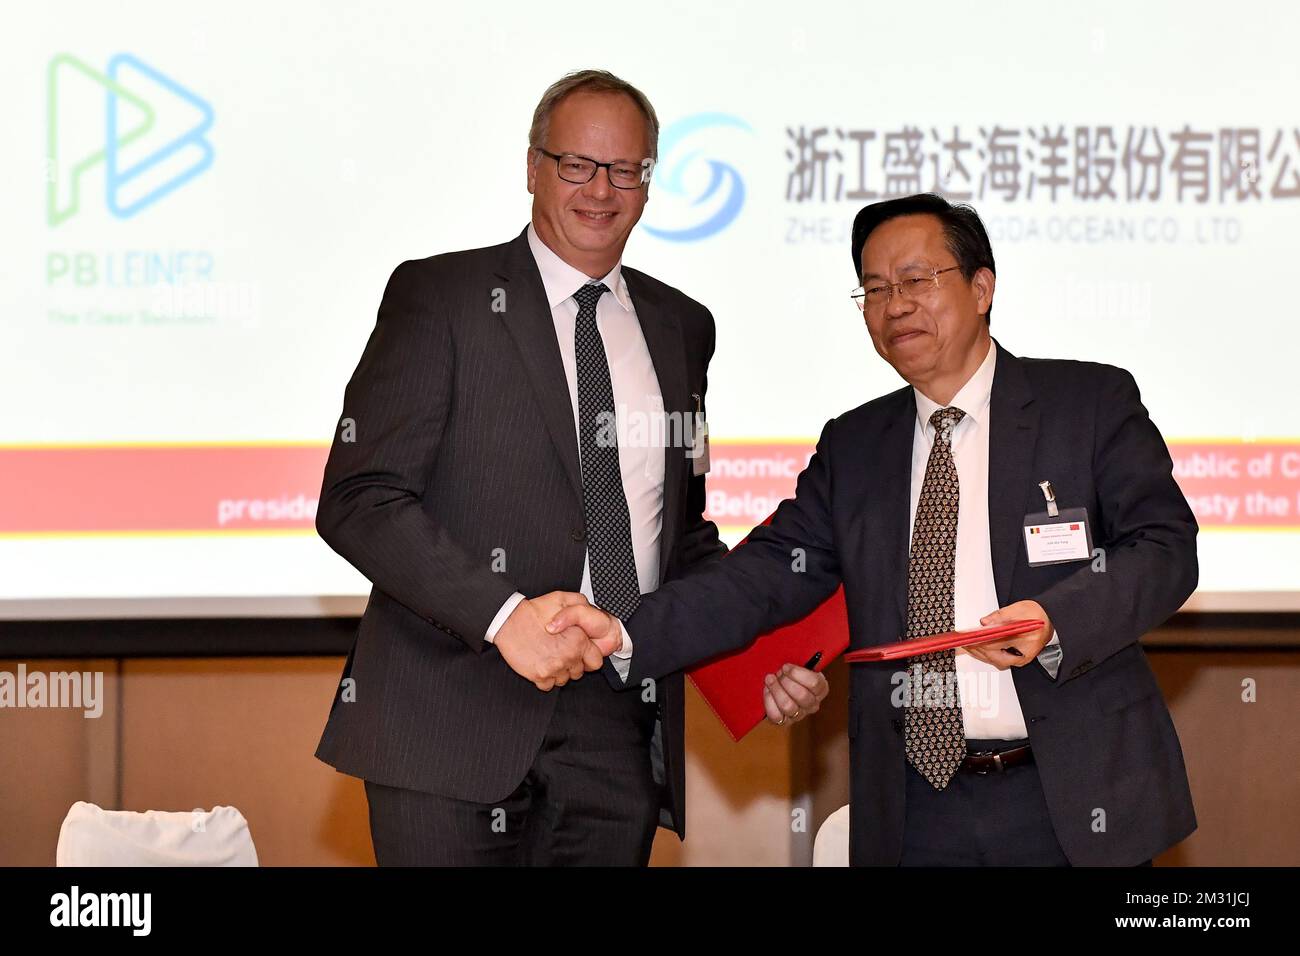 Wim POOT, Executive Vice President, PB LEINER and Ma Yong JUN, Chairman of Board of Directors, ZHEJIANG SHENGDA OCEAN pictured during a signing ceremony, on the third day of a Belgian economic trade mission to China, Wednesday 20 November 2019. Several federal and regional ministers accompany the princess on an economic mission to China from 18 to 23 November. BELGA PHOTO DIRK WAEM Stock Photo